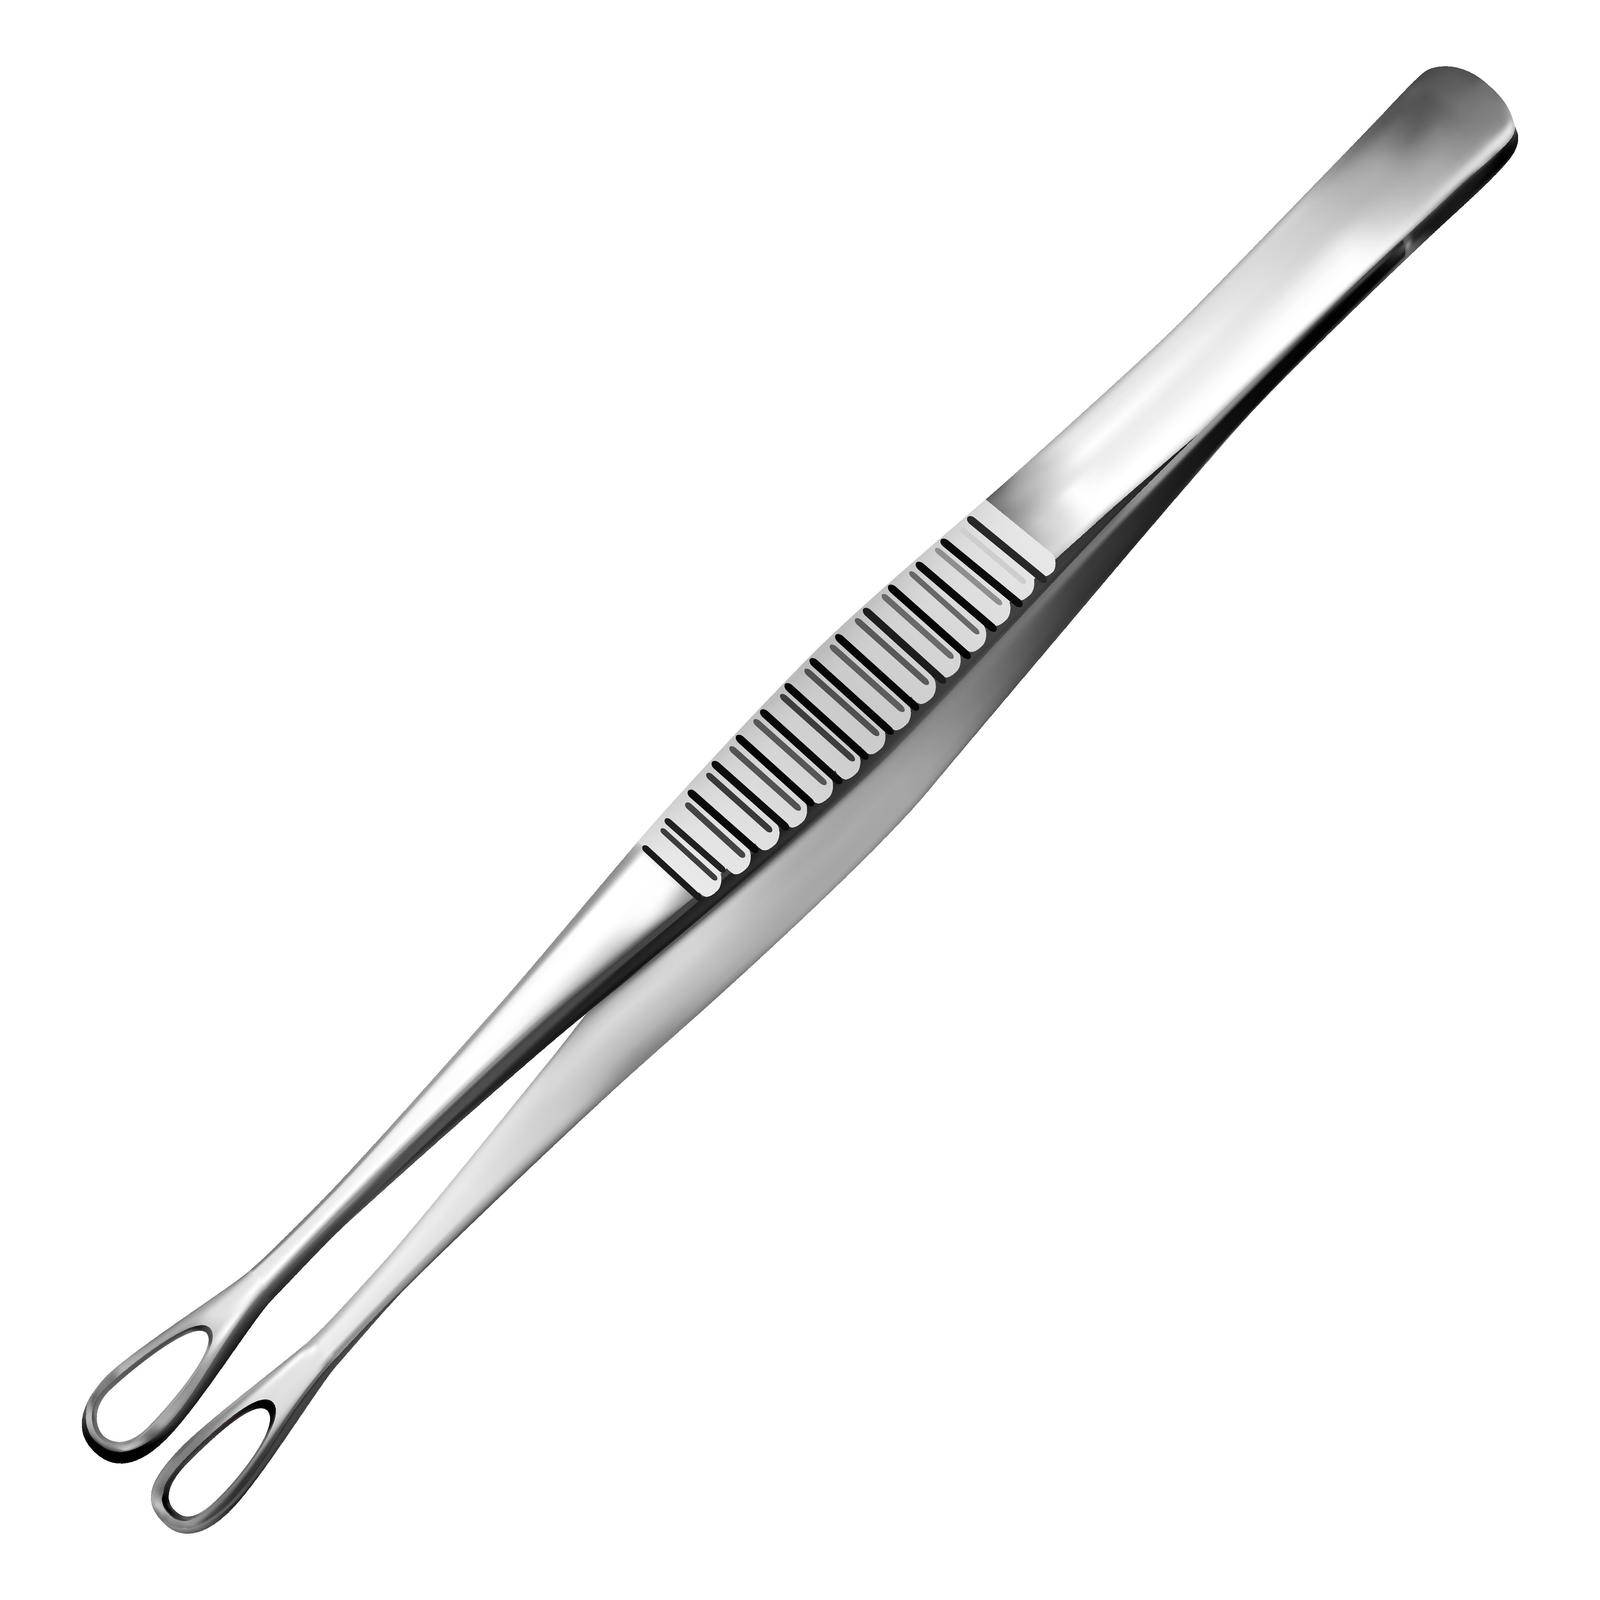 Surgical tumor grasping forceps. Tweezers for deduction of a tumor of a brain. Surgeon s hand tool. Realistic object on a white background. Vector by Nikolaiev_Oleksii